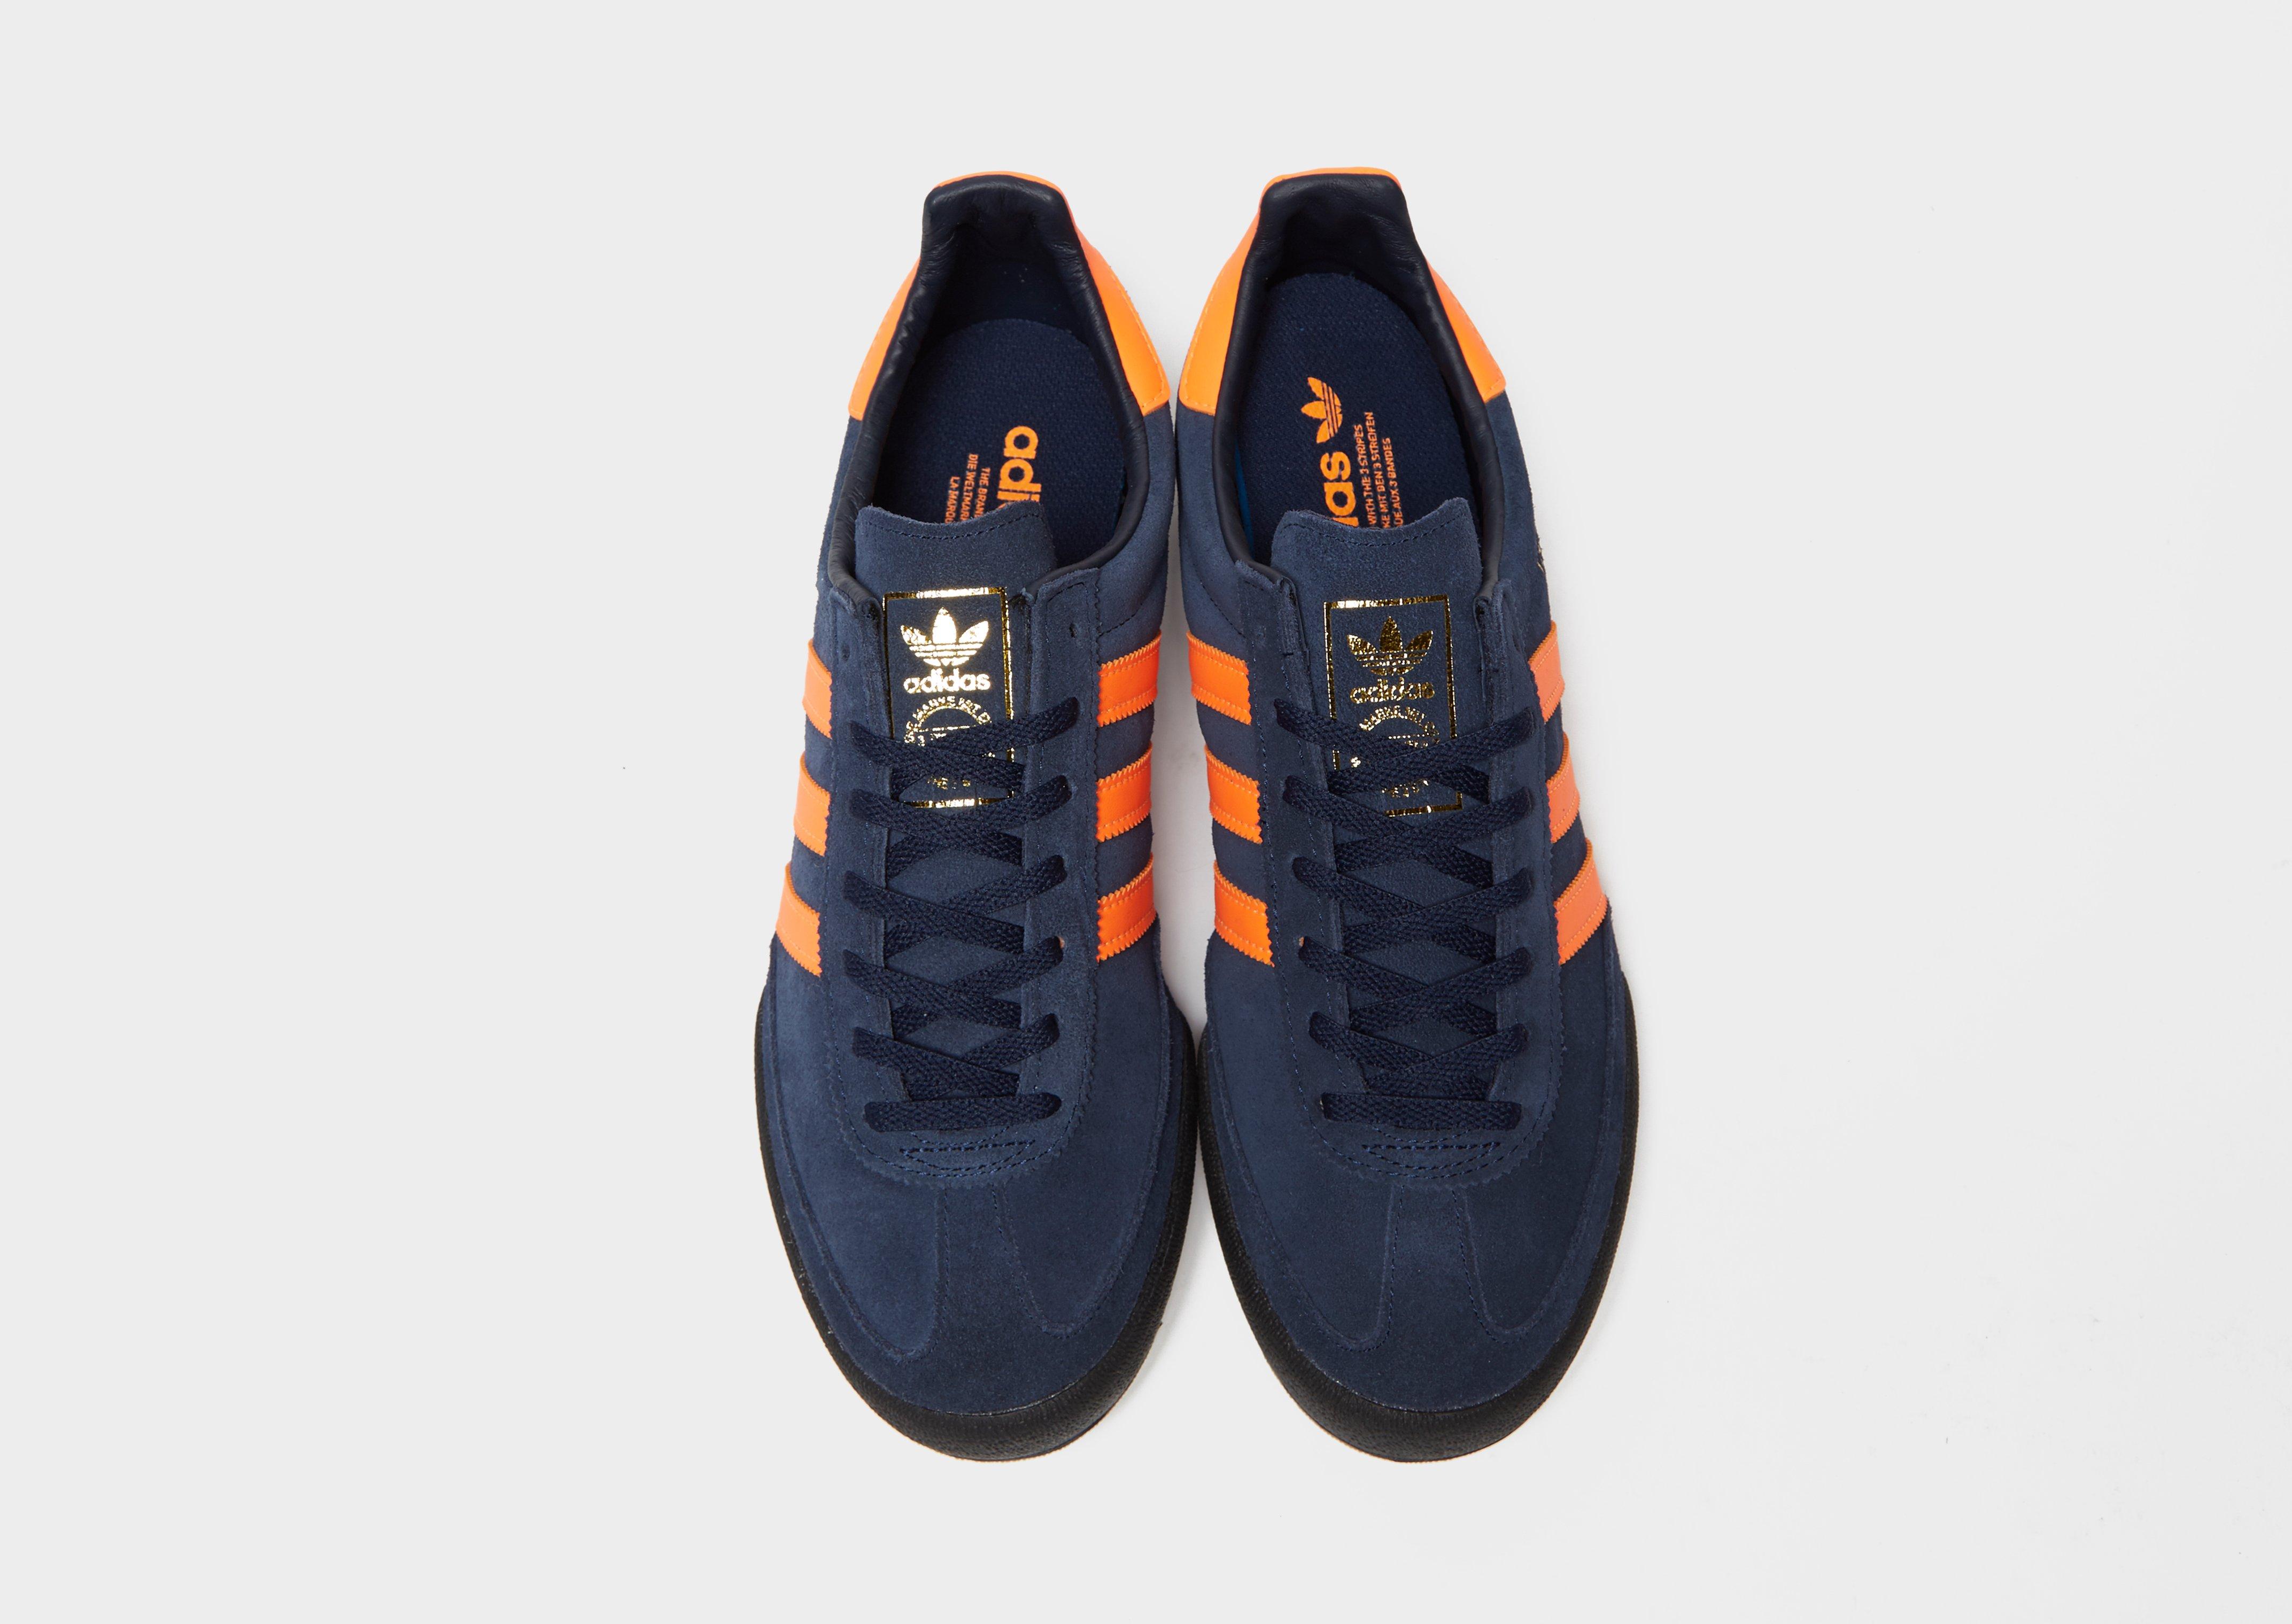 adidas jeans trainers blue and orange